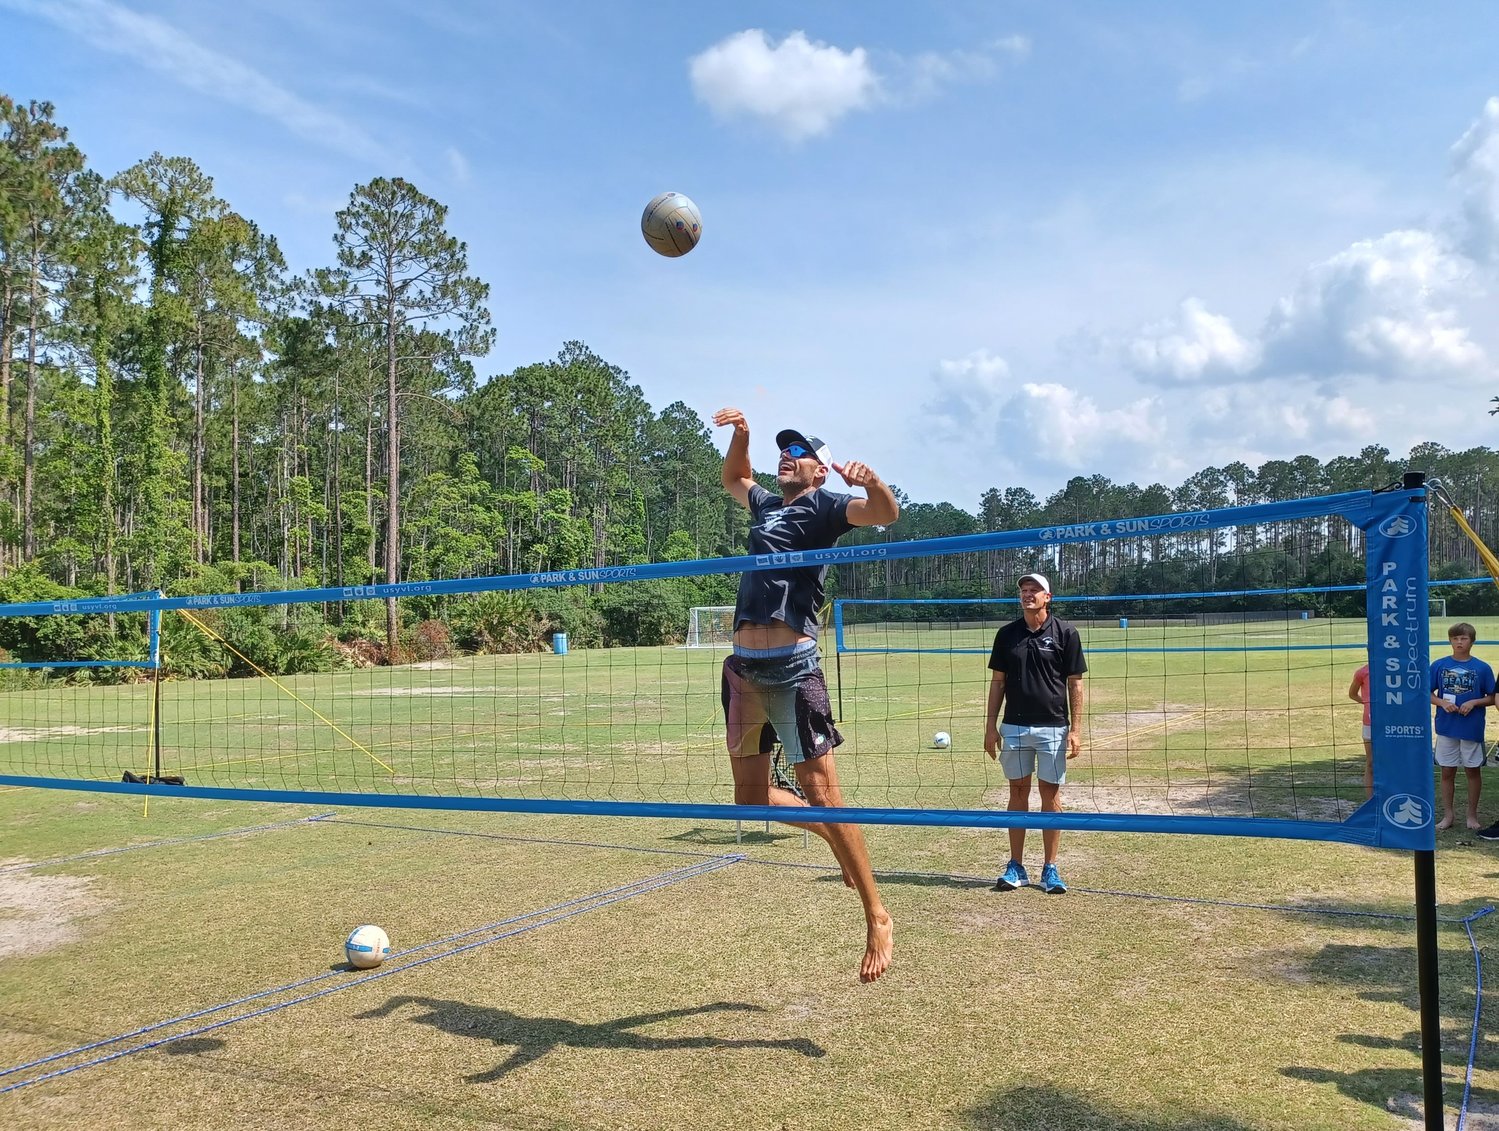 Olympic gold medalist Phil Dalhausser demonstrates the right way to spike the ball during a youth volleyball class at Nocatee Community Park.